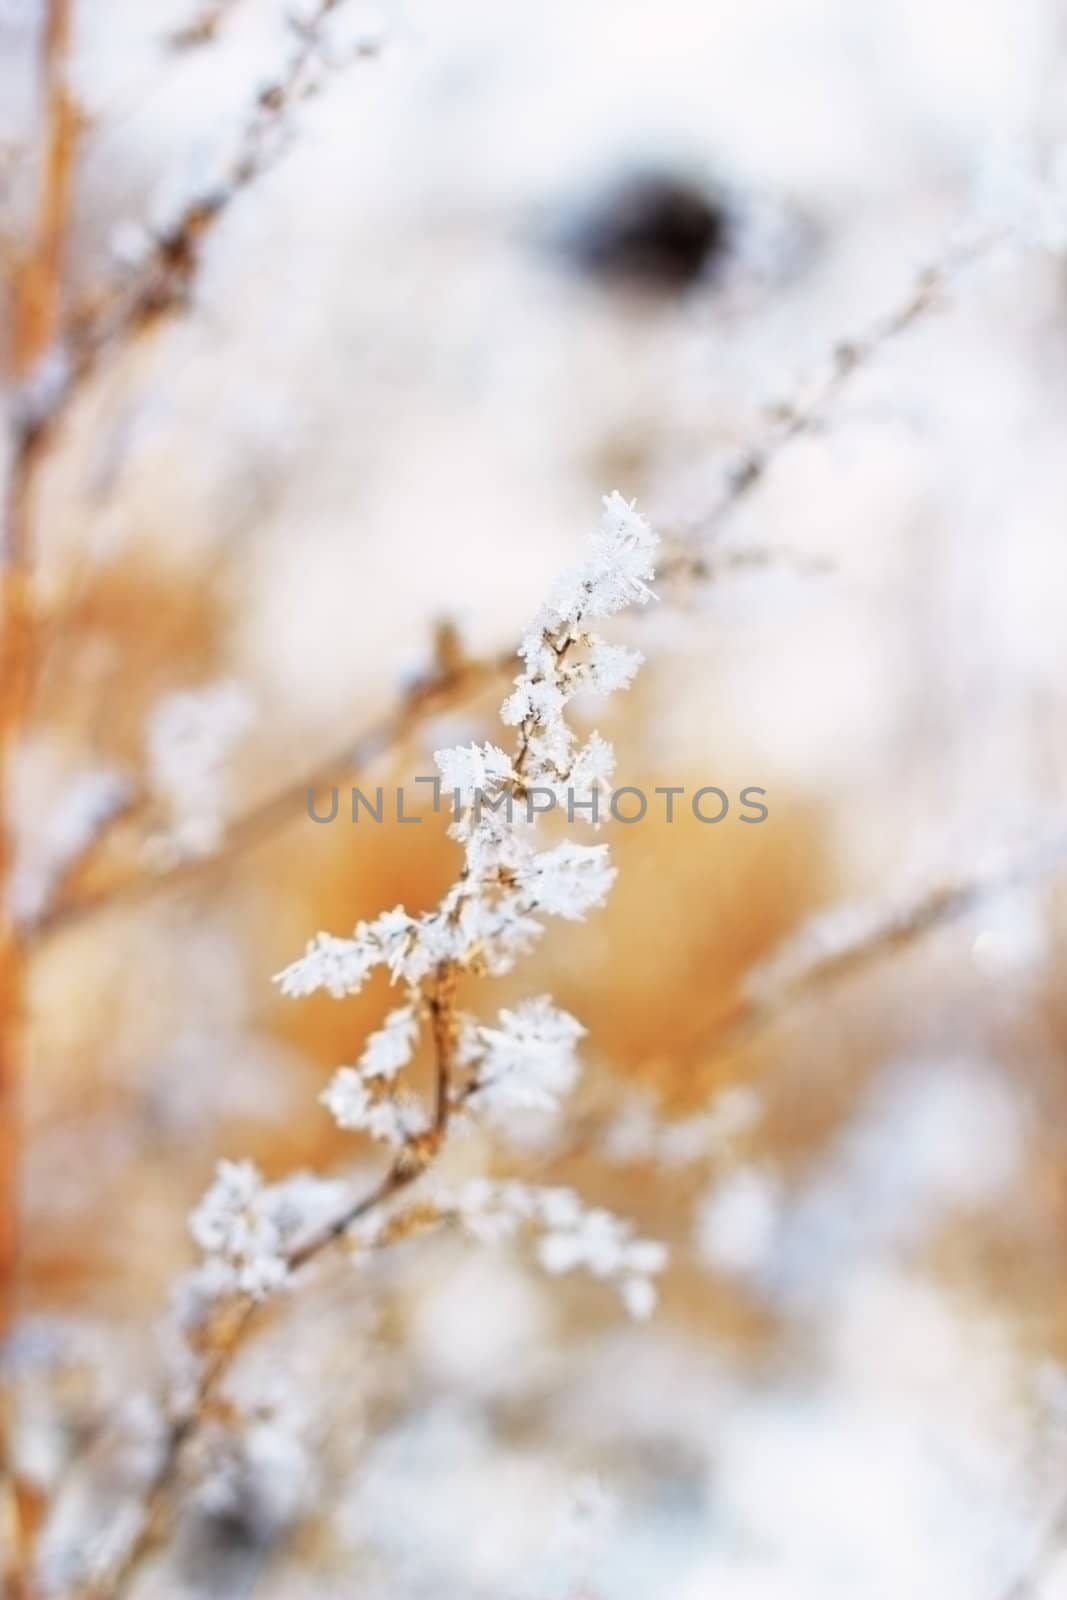 twig full of rime in winter - short dof and blurred background